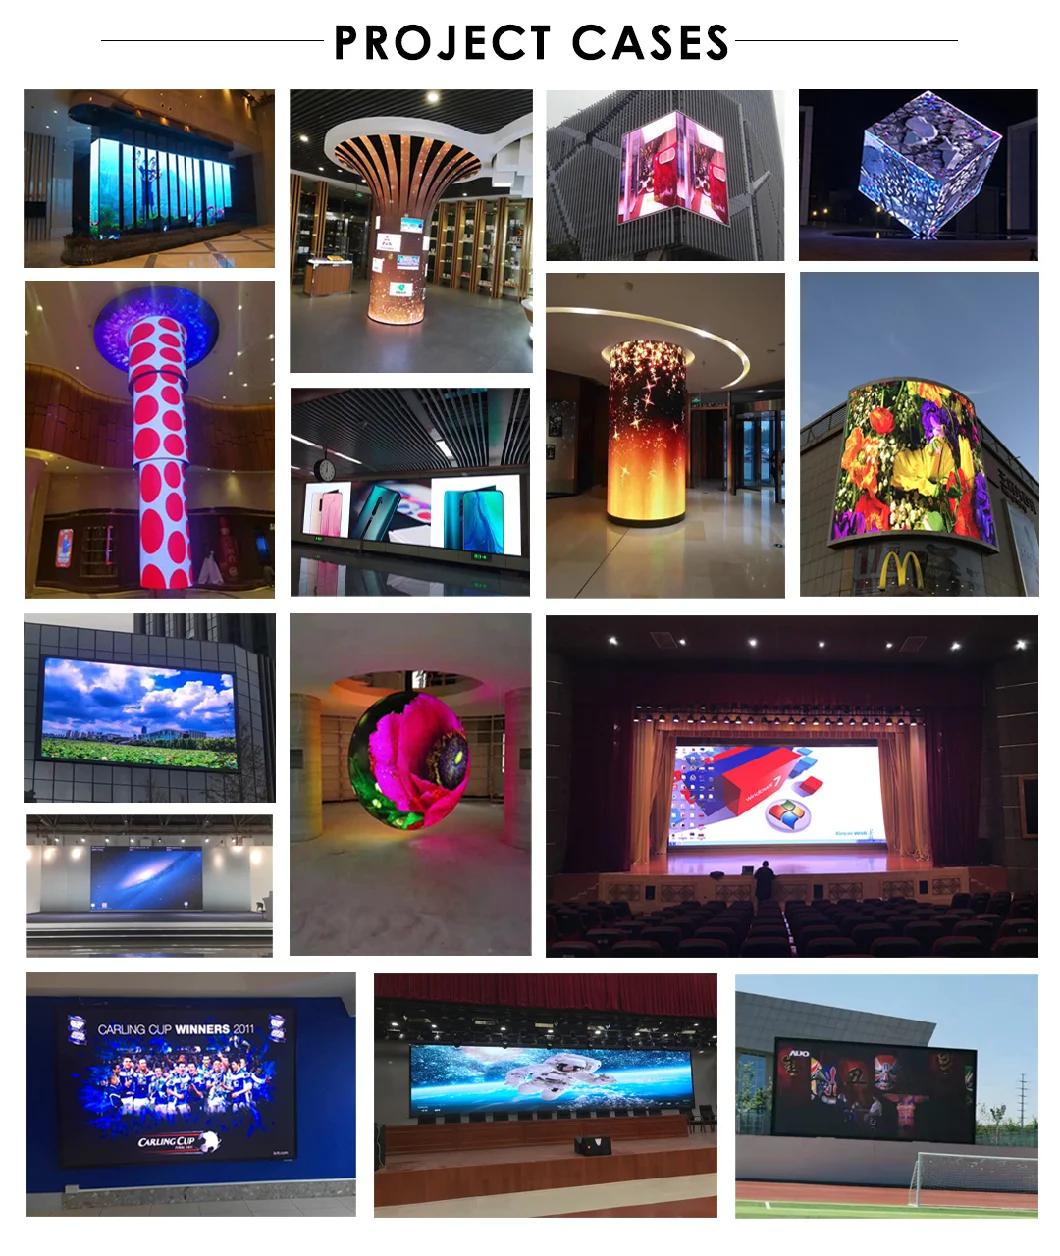 New Indoor Small Pitch High Definition P1.25 P1.538 P1.667 P1.86 P2 HD LED Display Screen